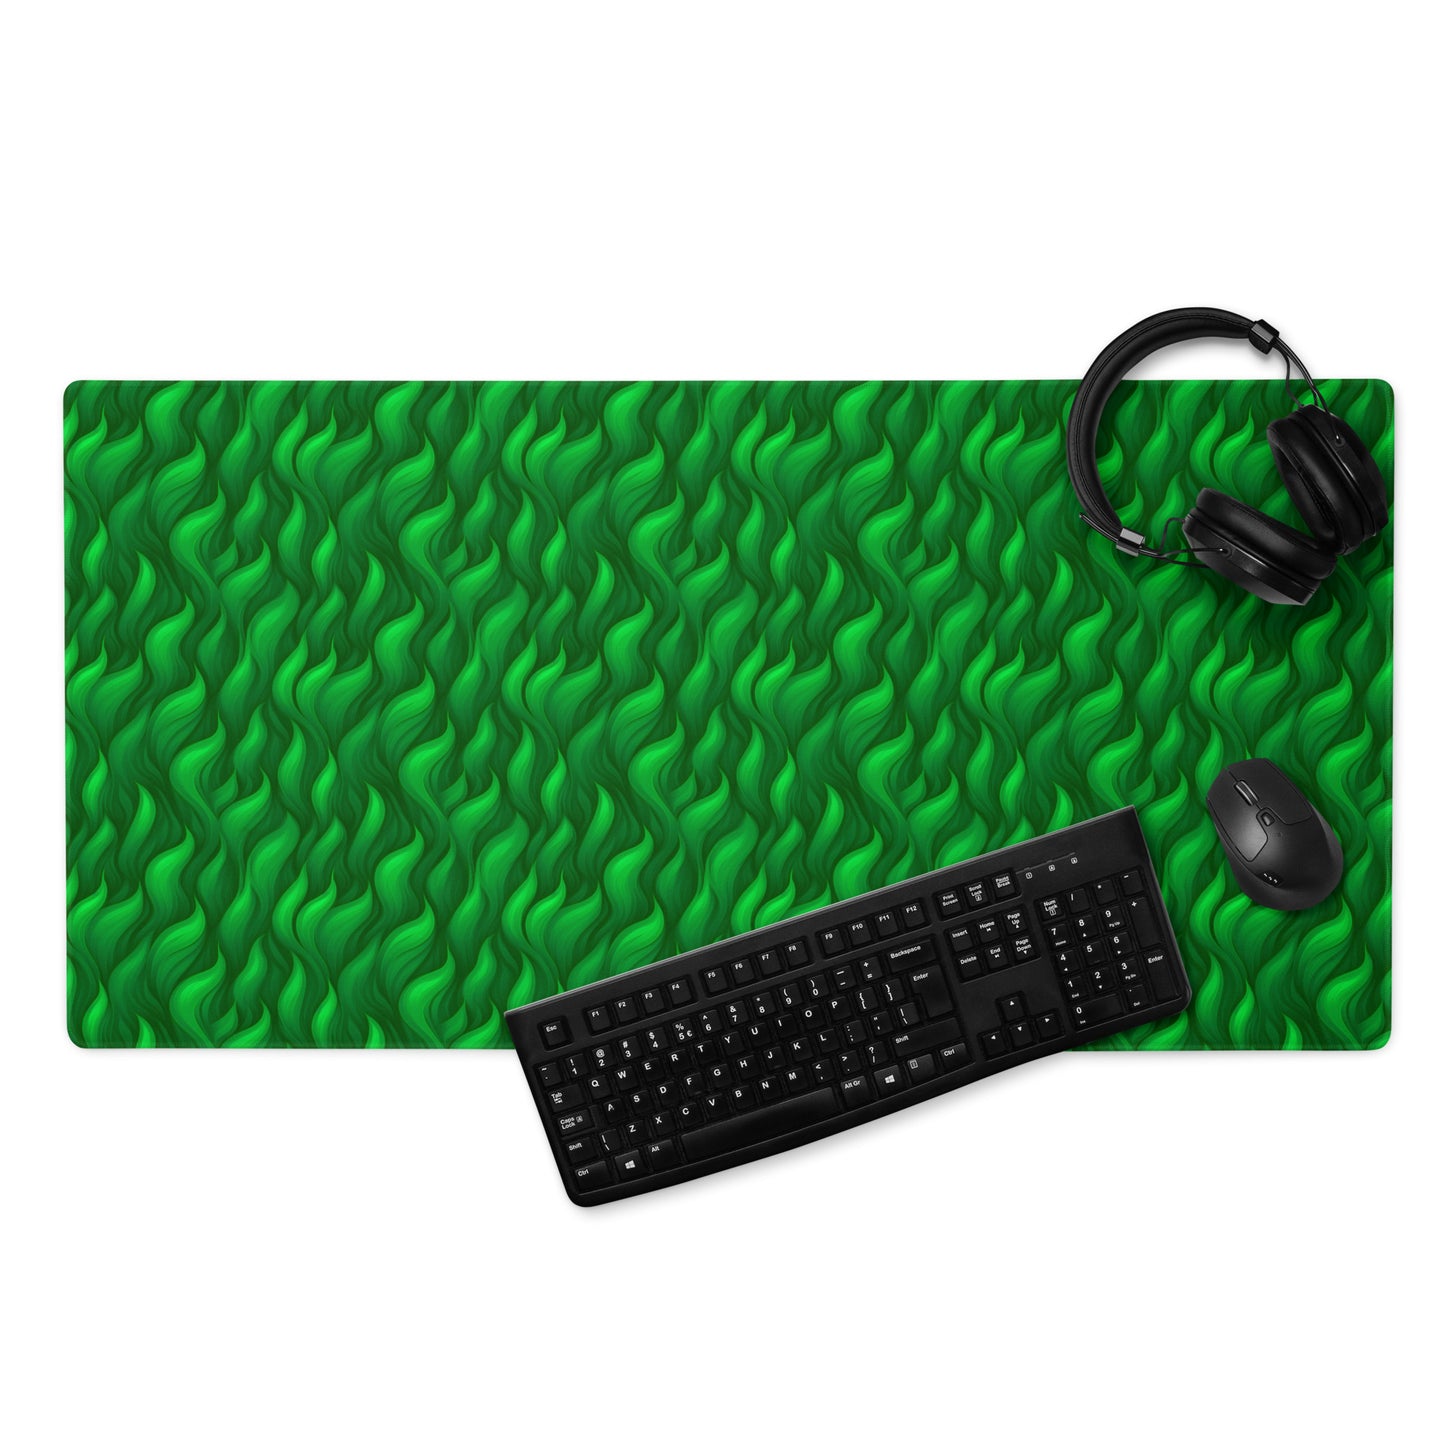 A 36" x 18" desk pad with a wavy flame pattern on it displayed with a keyboard, headphones and a mouse. Green in color.